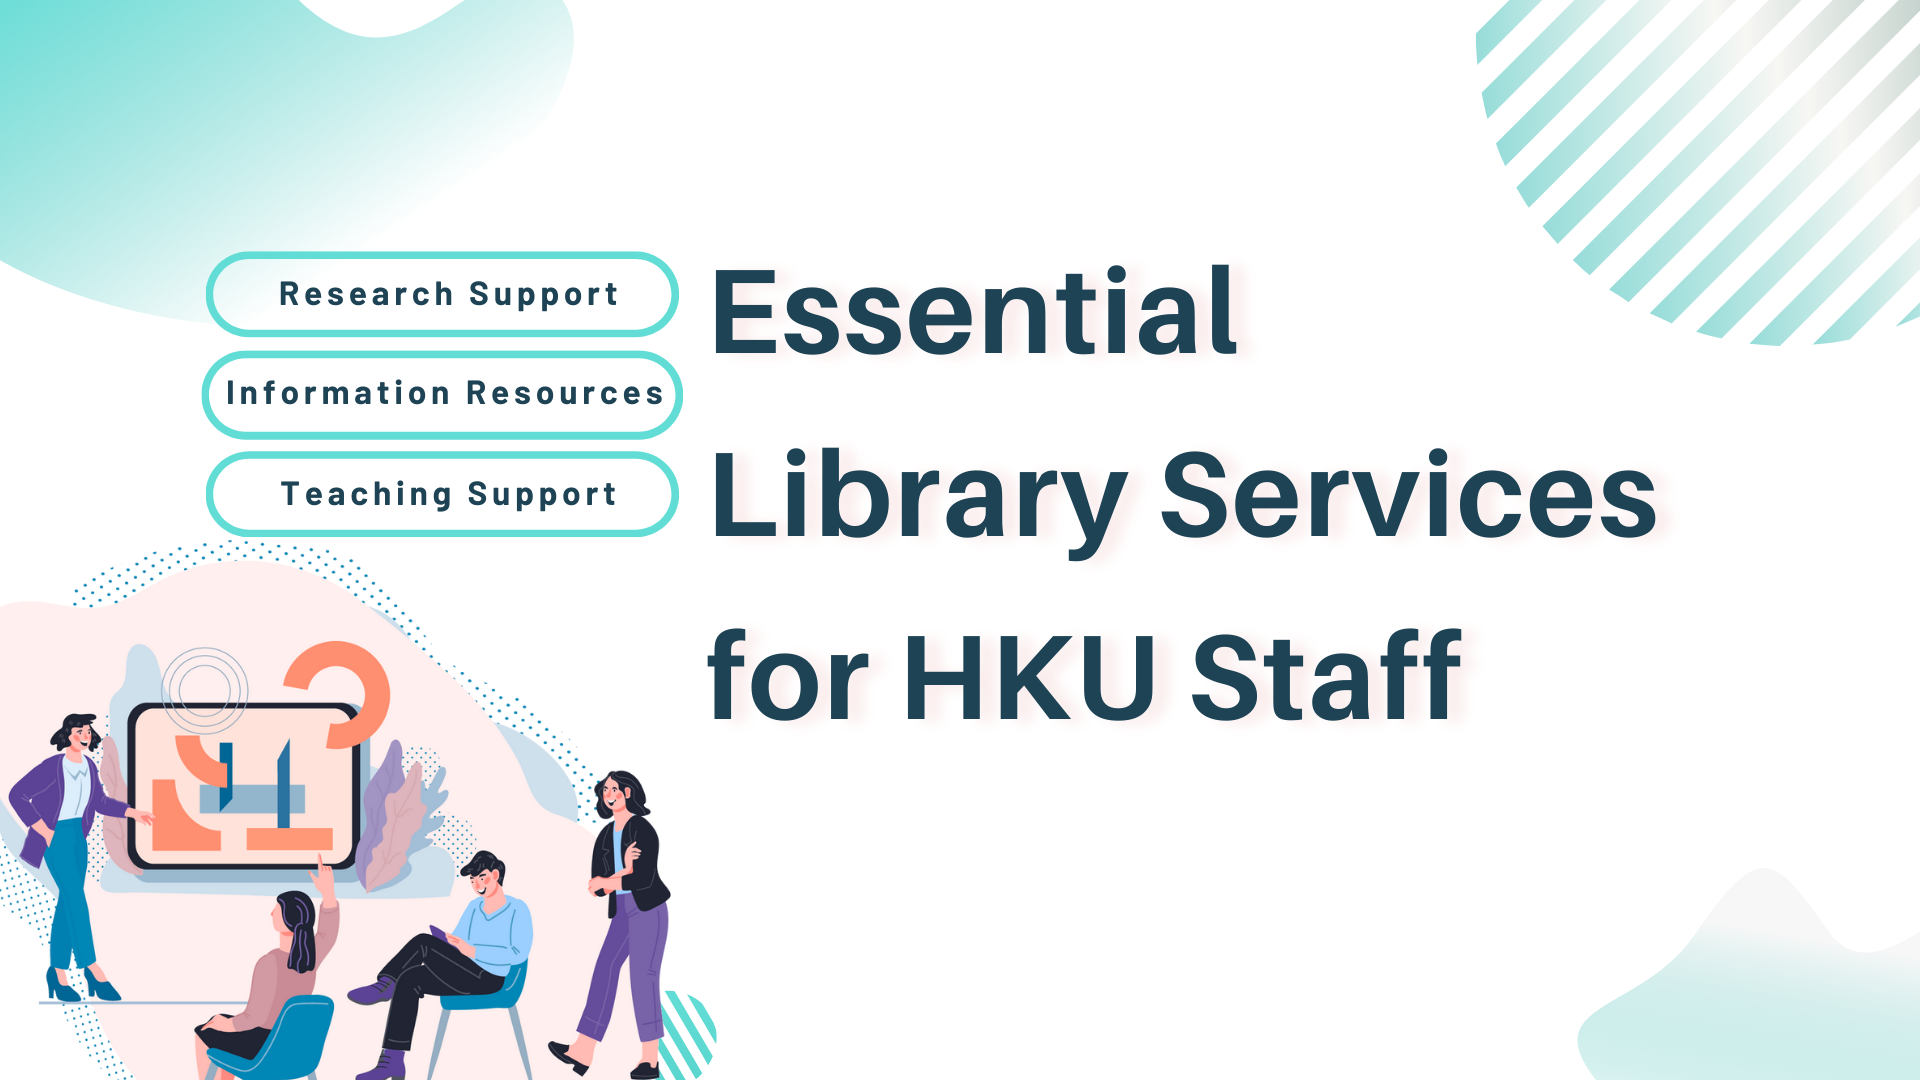 Essential Library Services for HKU Staff